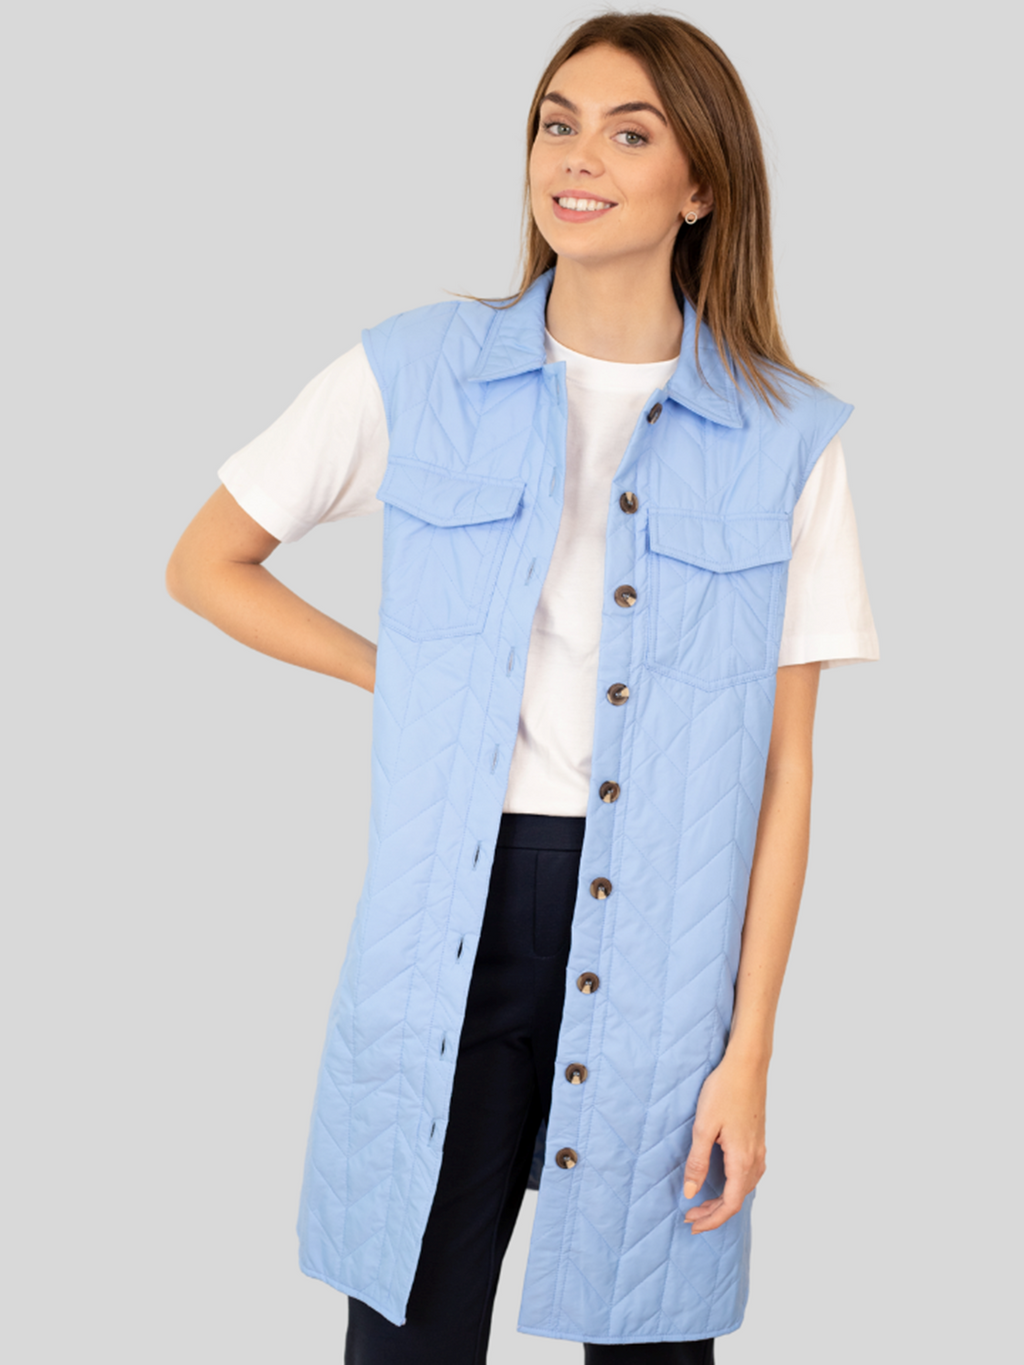 Magda Lang Quilted Vest - Hydrangea